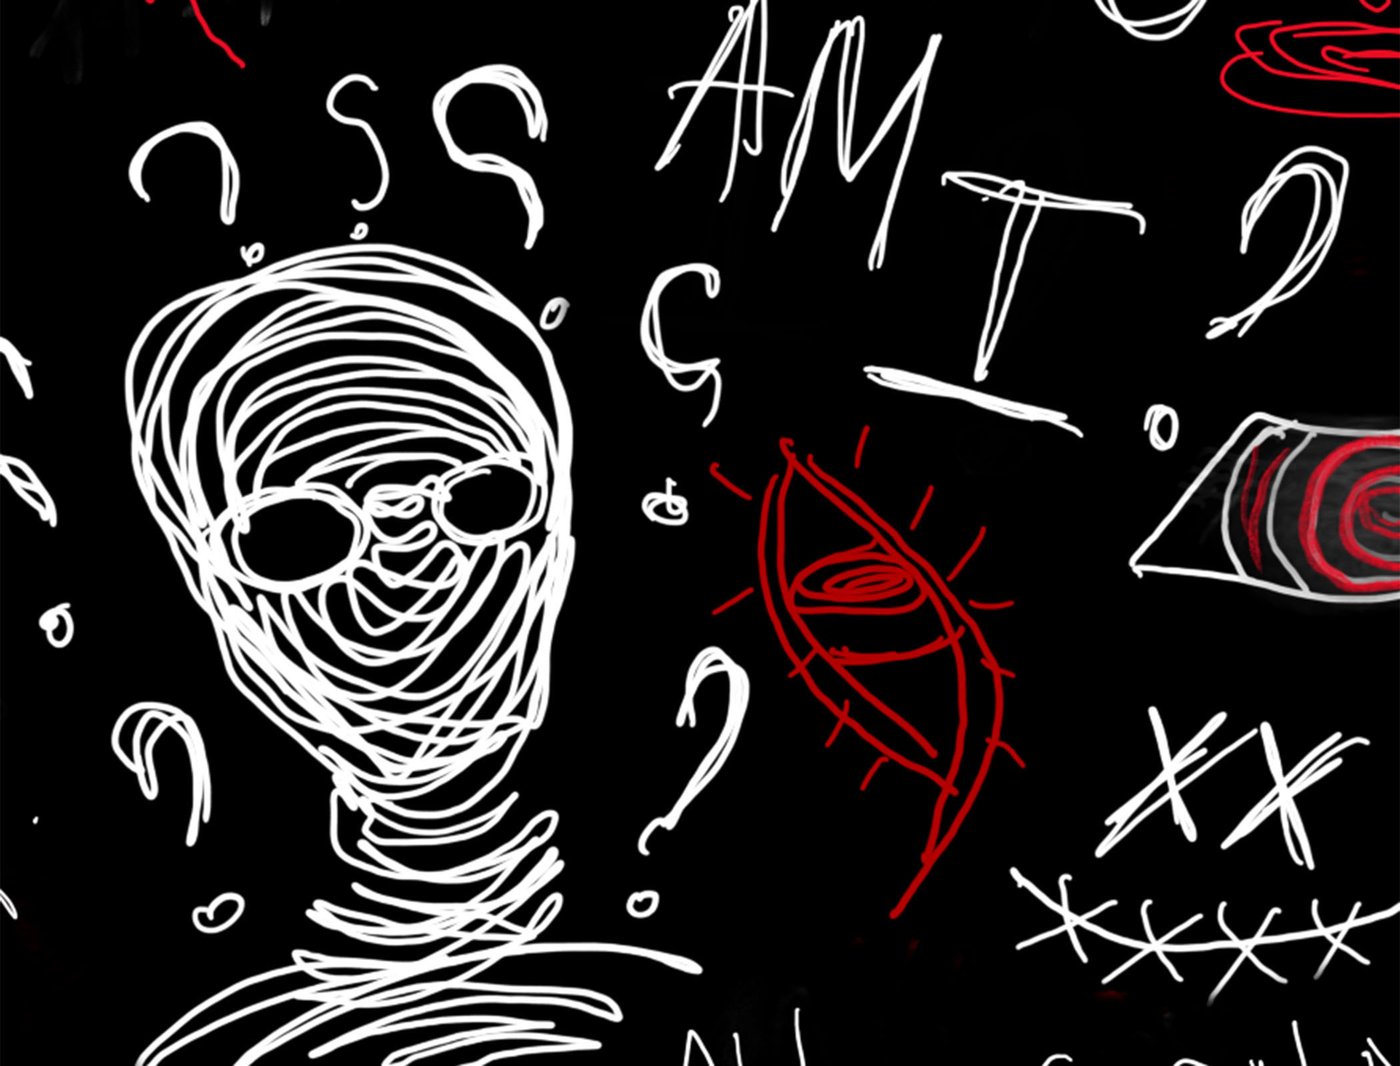 On black background there are several different white and red scribbles. In the left part of the graphic there is a large human head surrounded with question marks, stylized eyes and other signs. You can also see the part of a saying: [Who] am I?